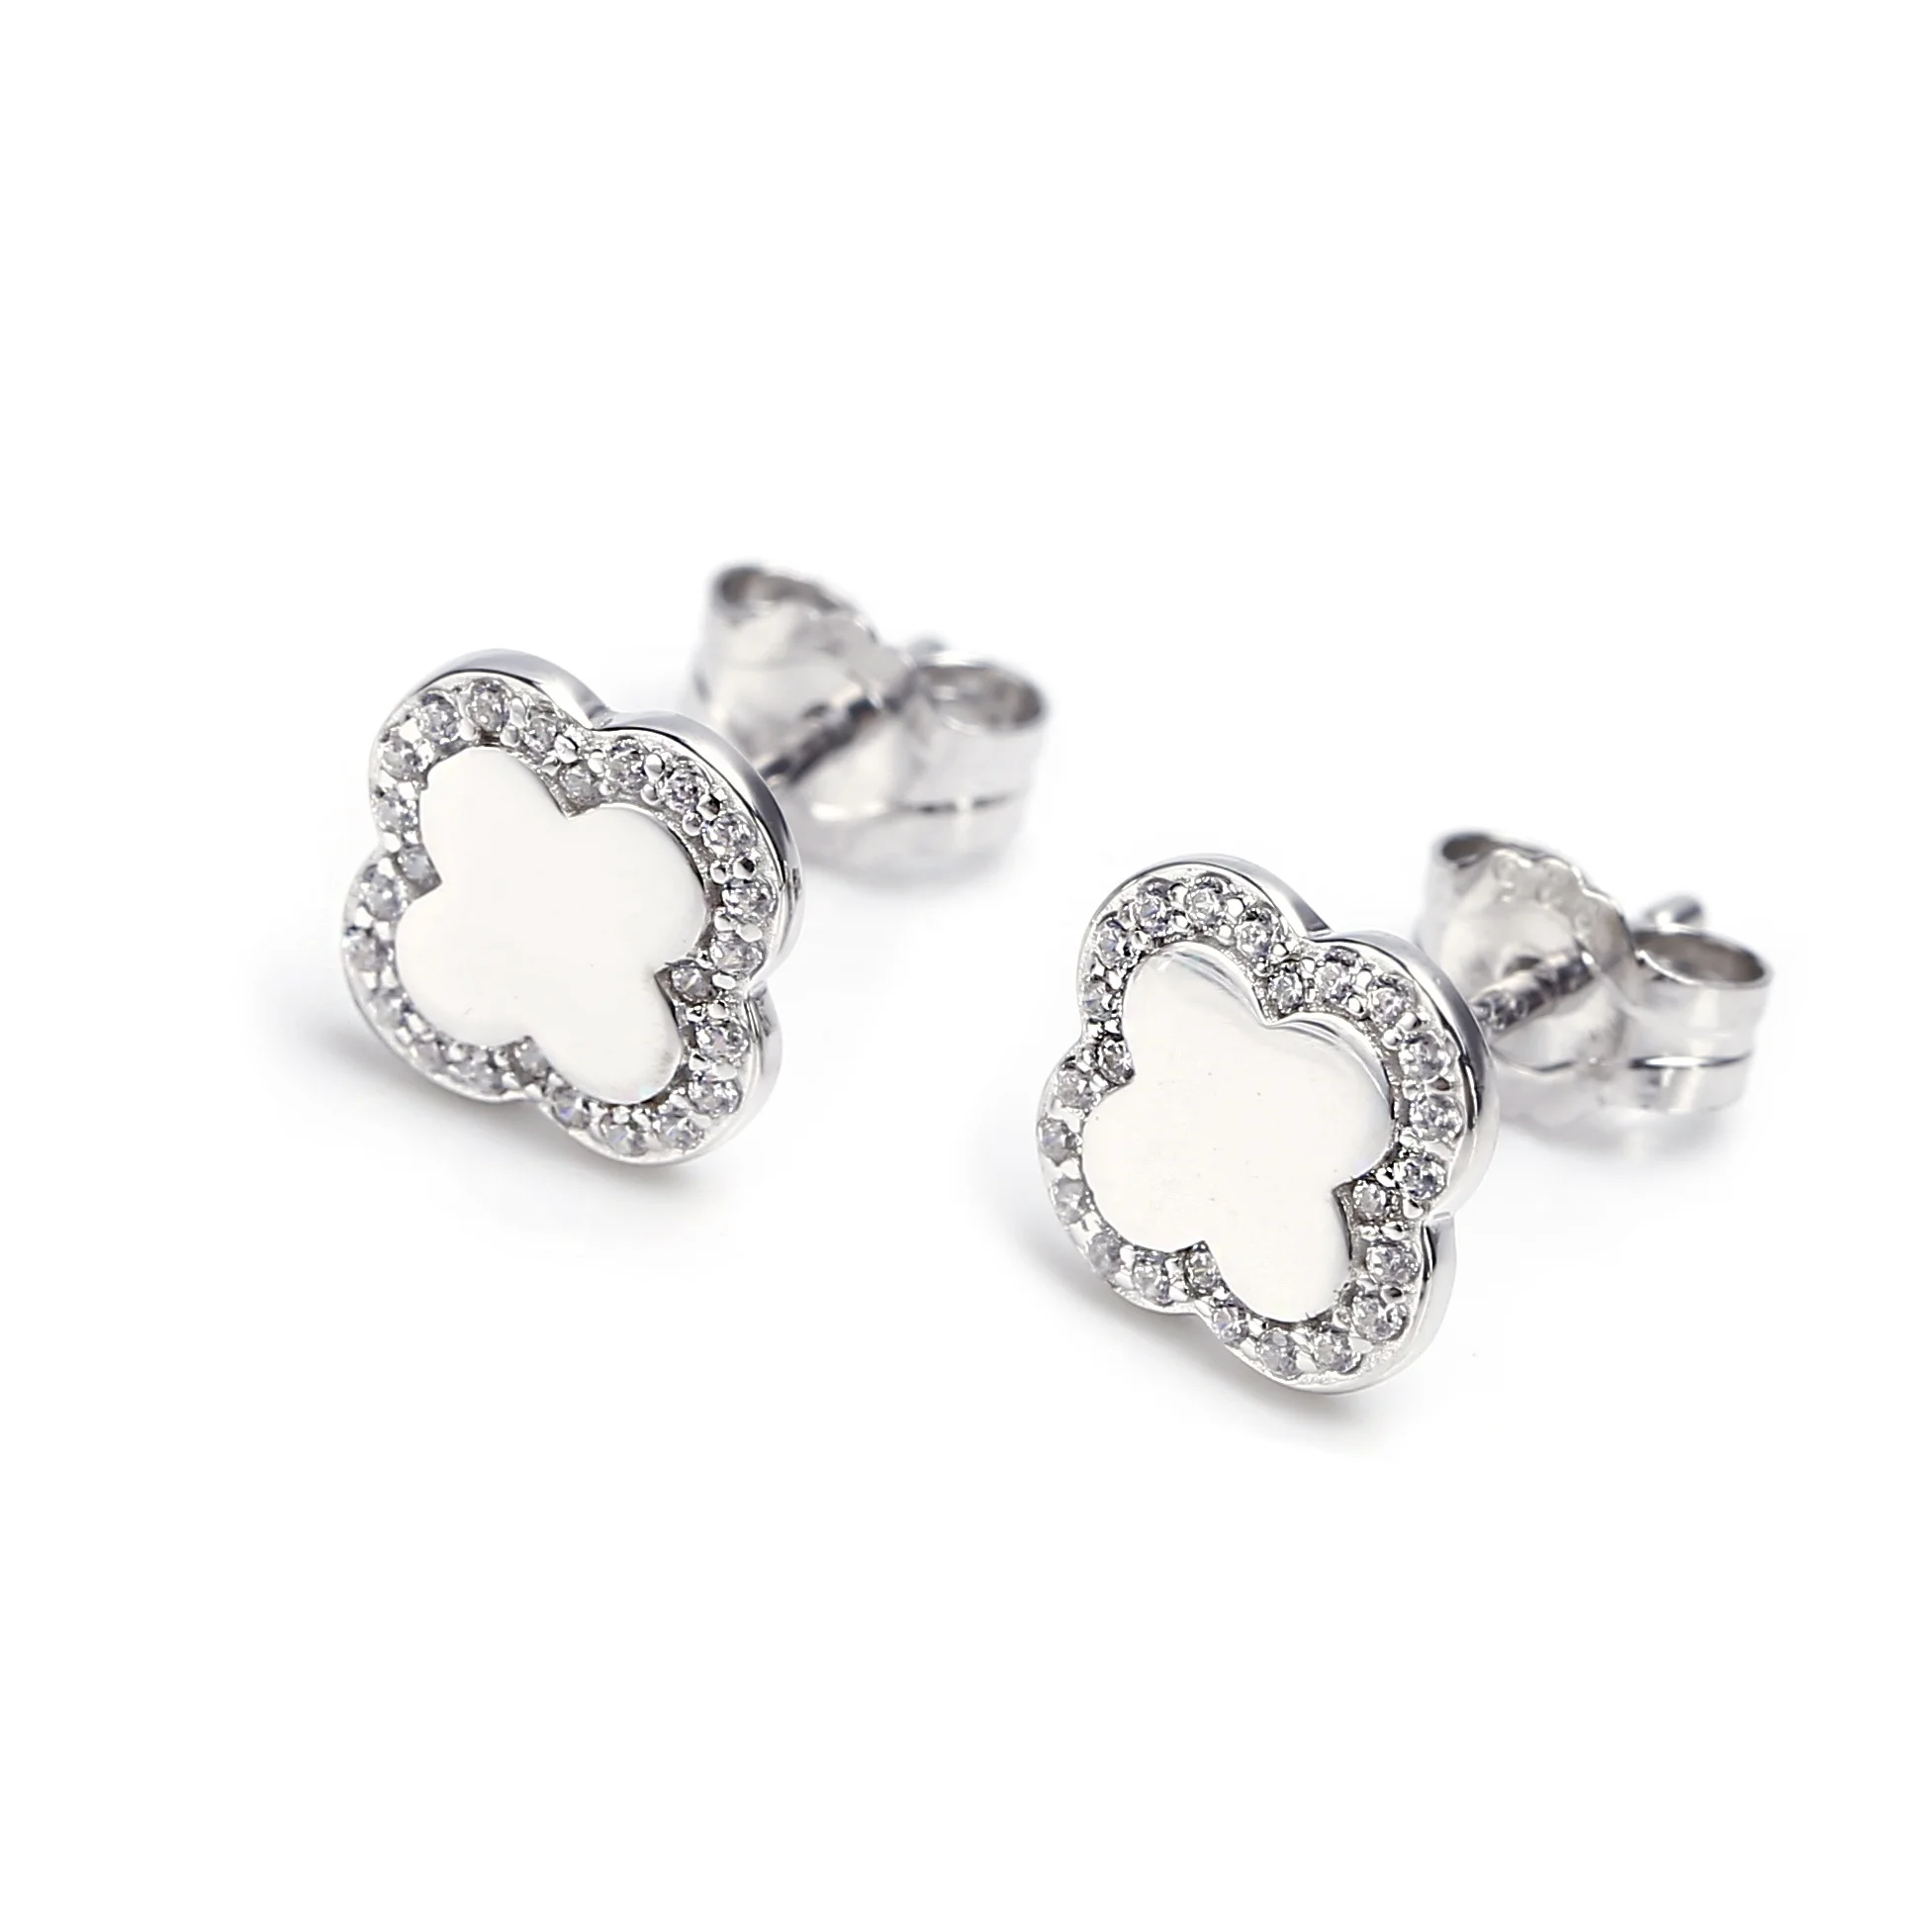 Four Leaf Clover Sterling Silver Earring Studs